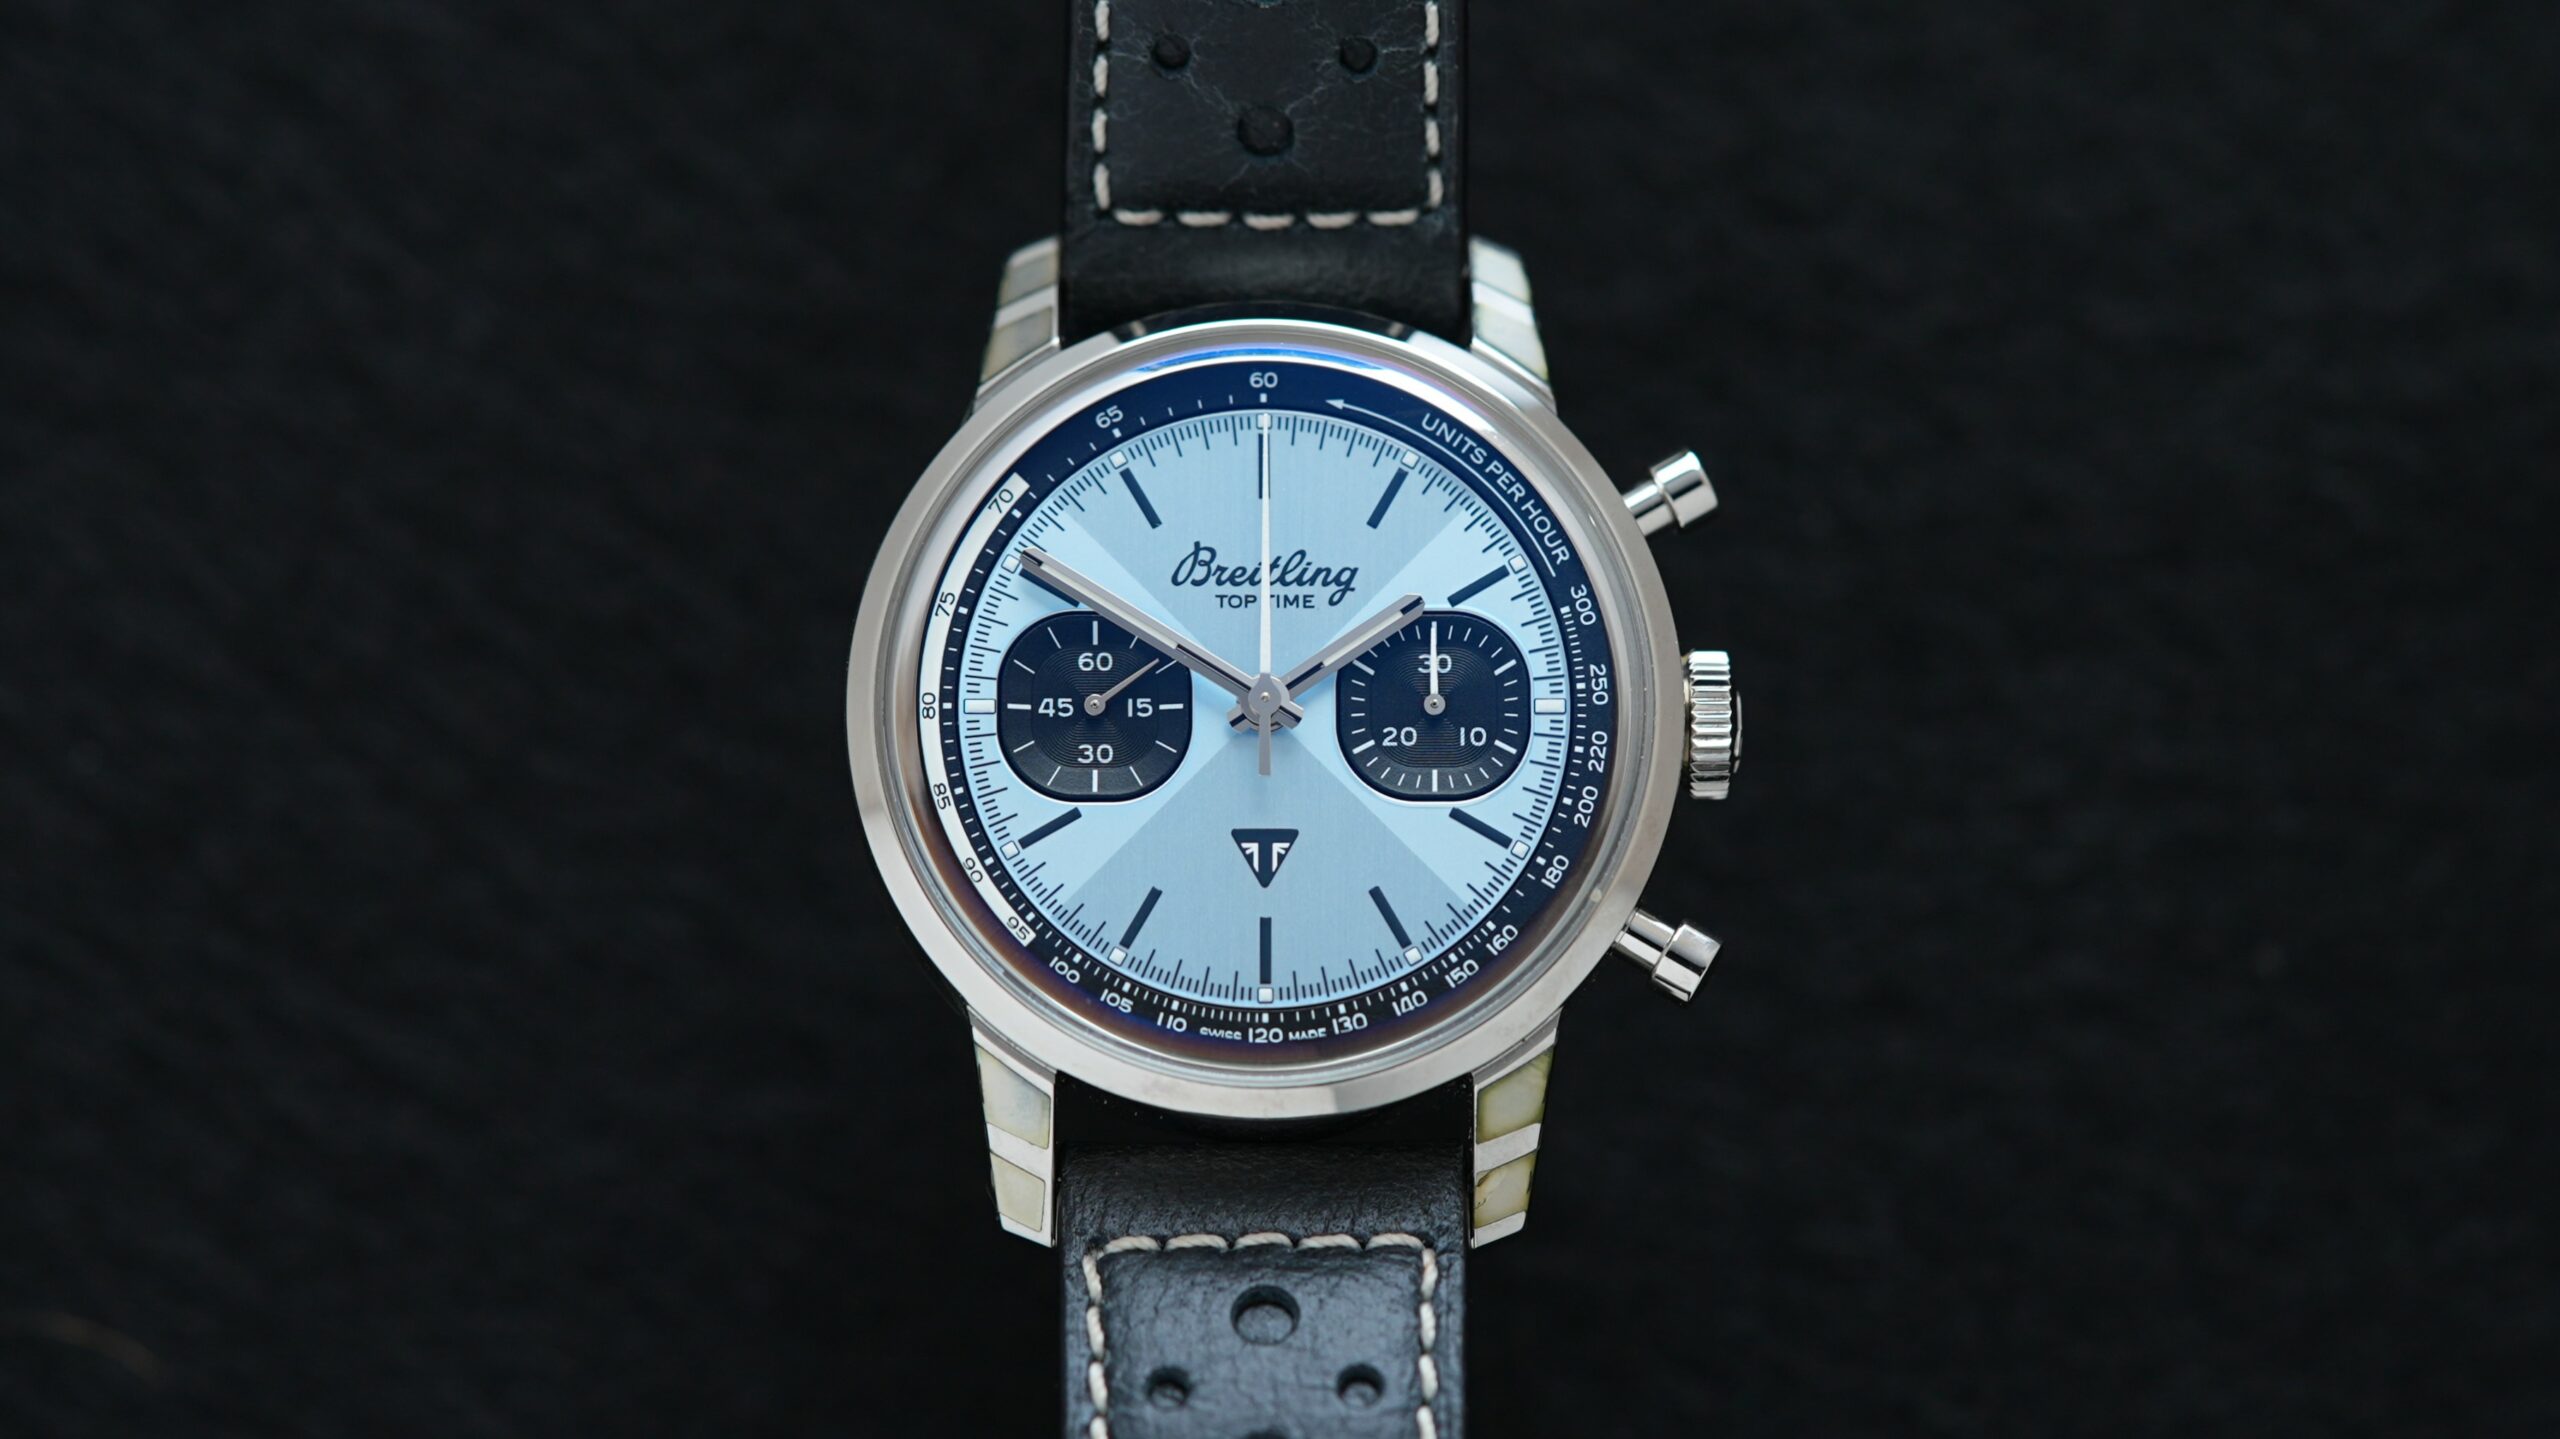 Breitling Top Time Chronograph Automatic Blue Dial Men's Watch